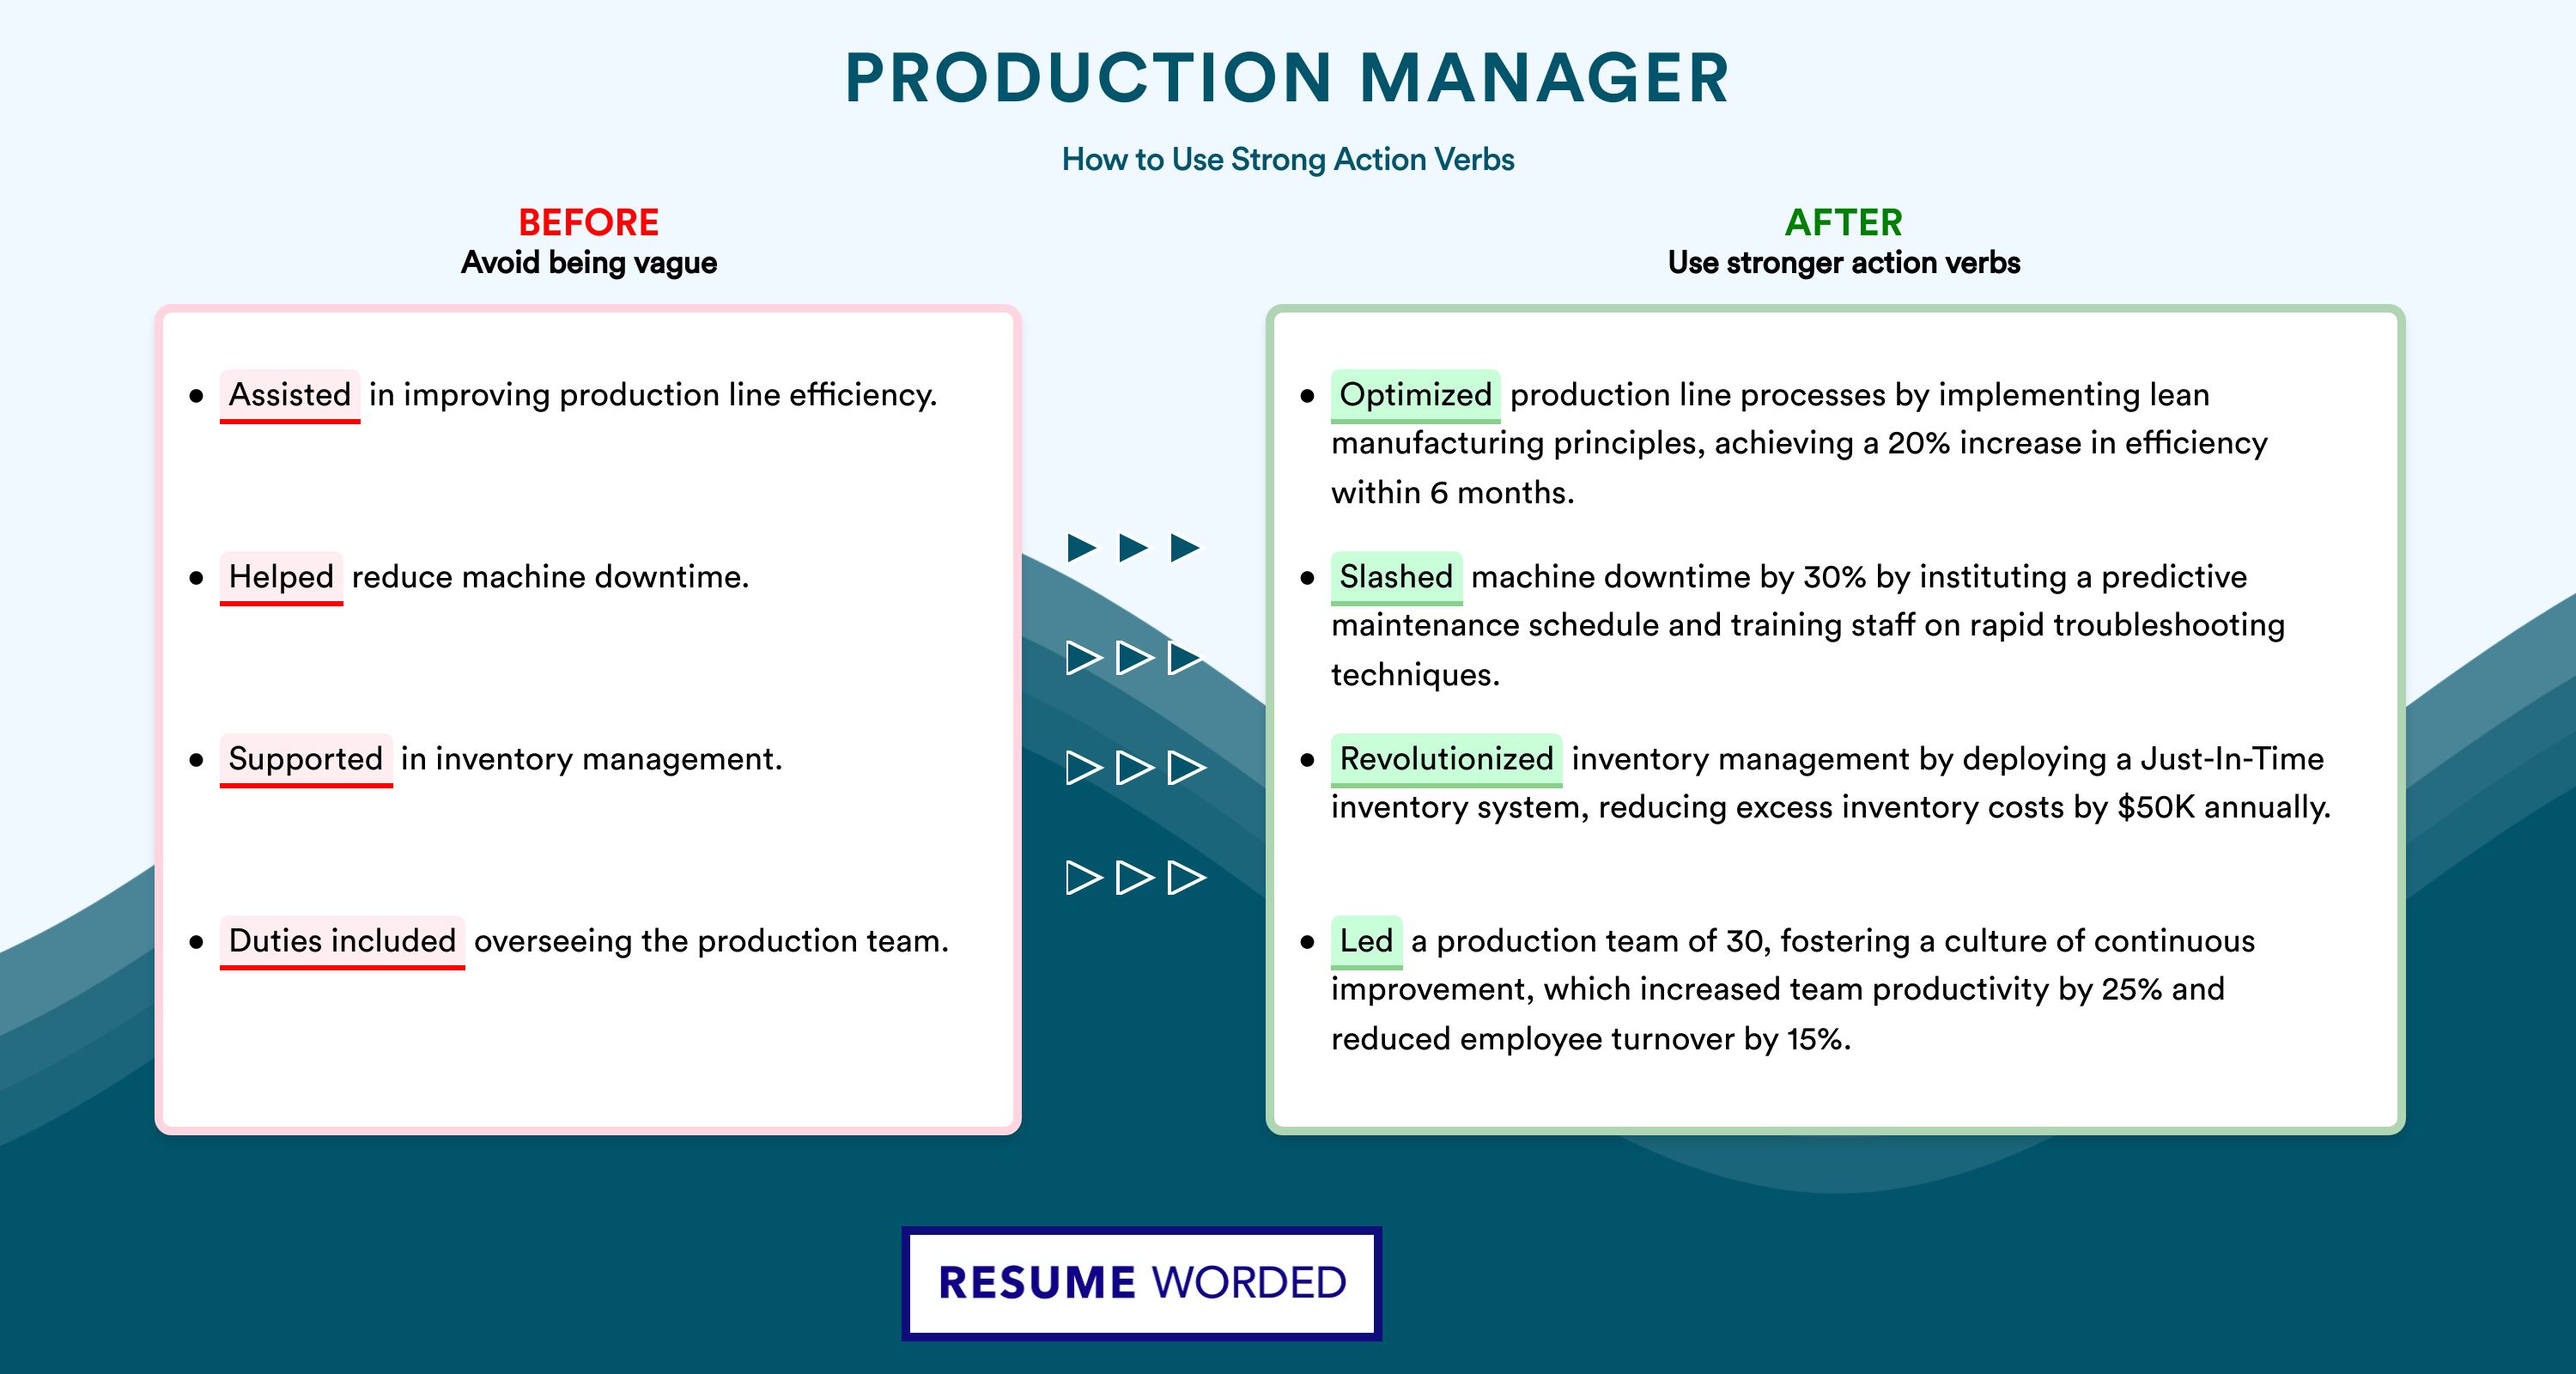 Action Verbs for Production Manager